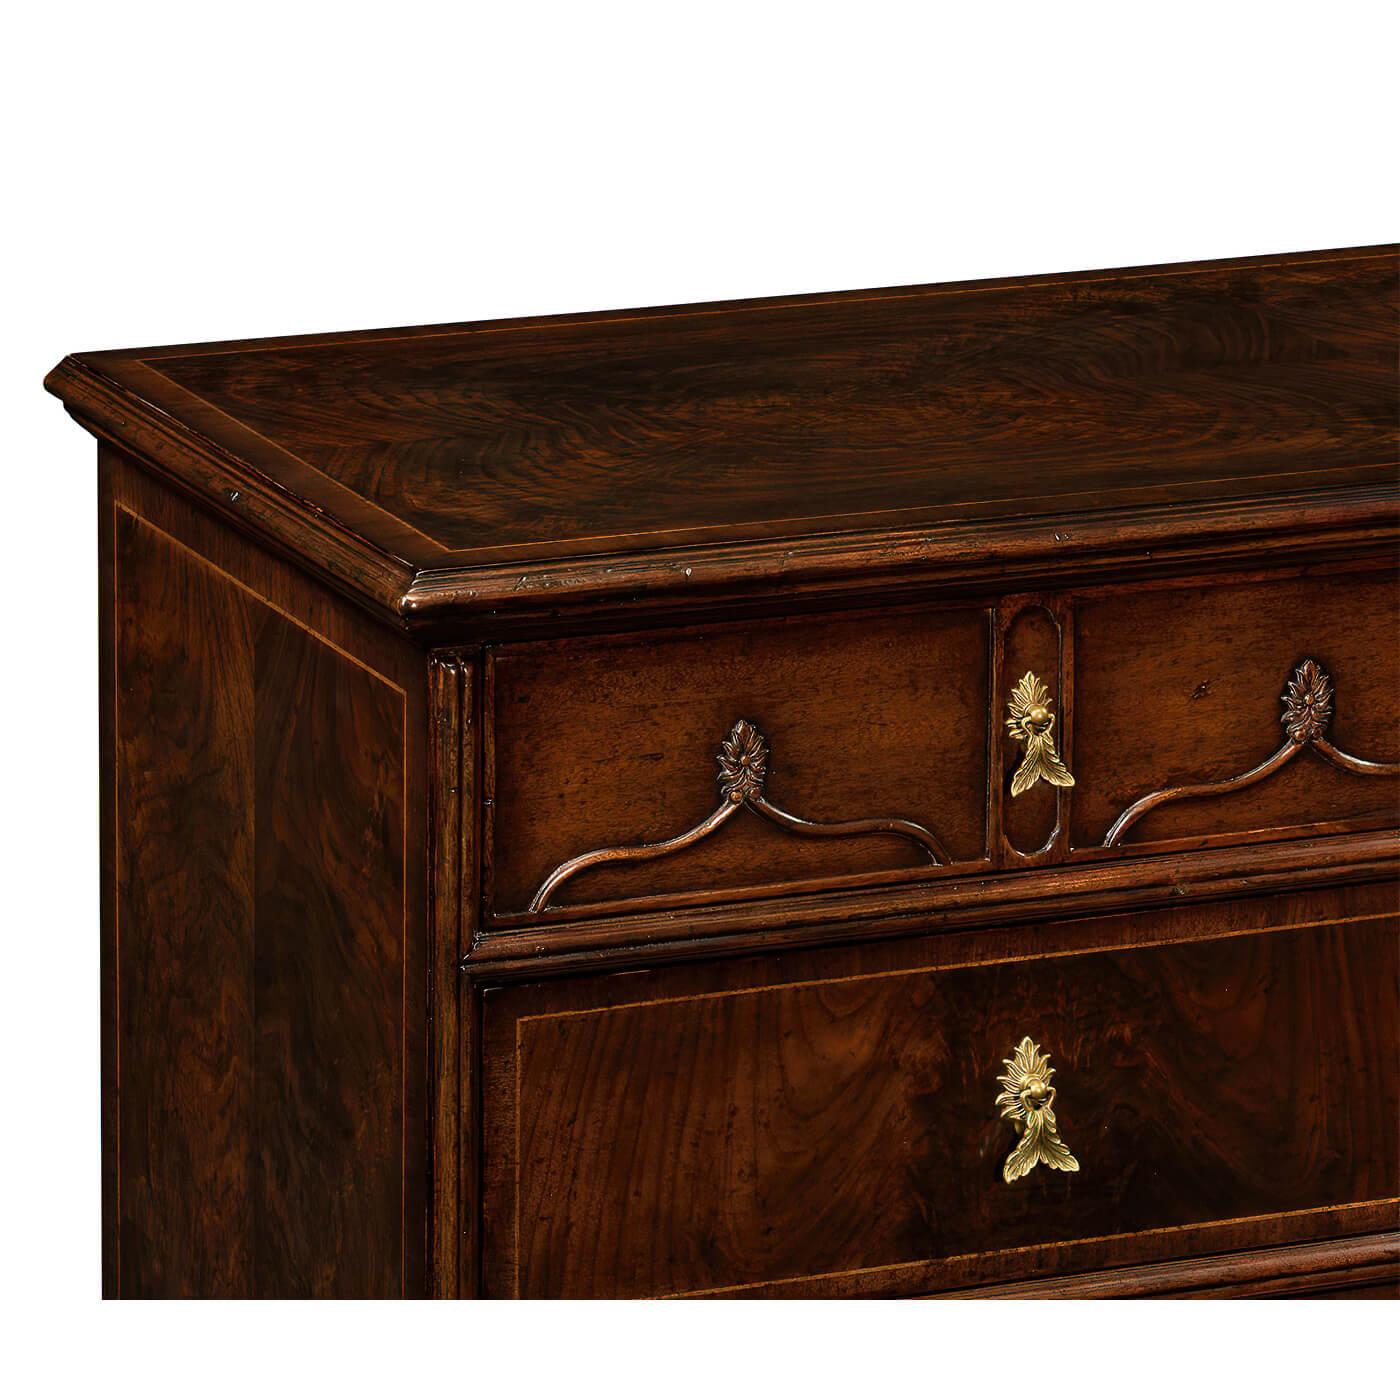 European Gothic Chippendale Chest of Drawers